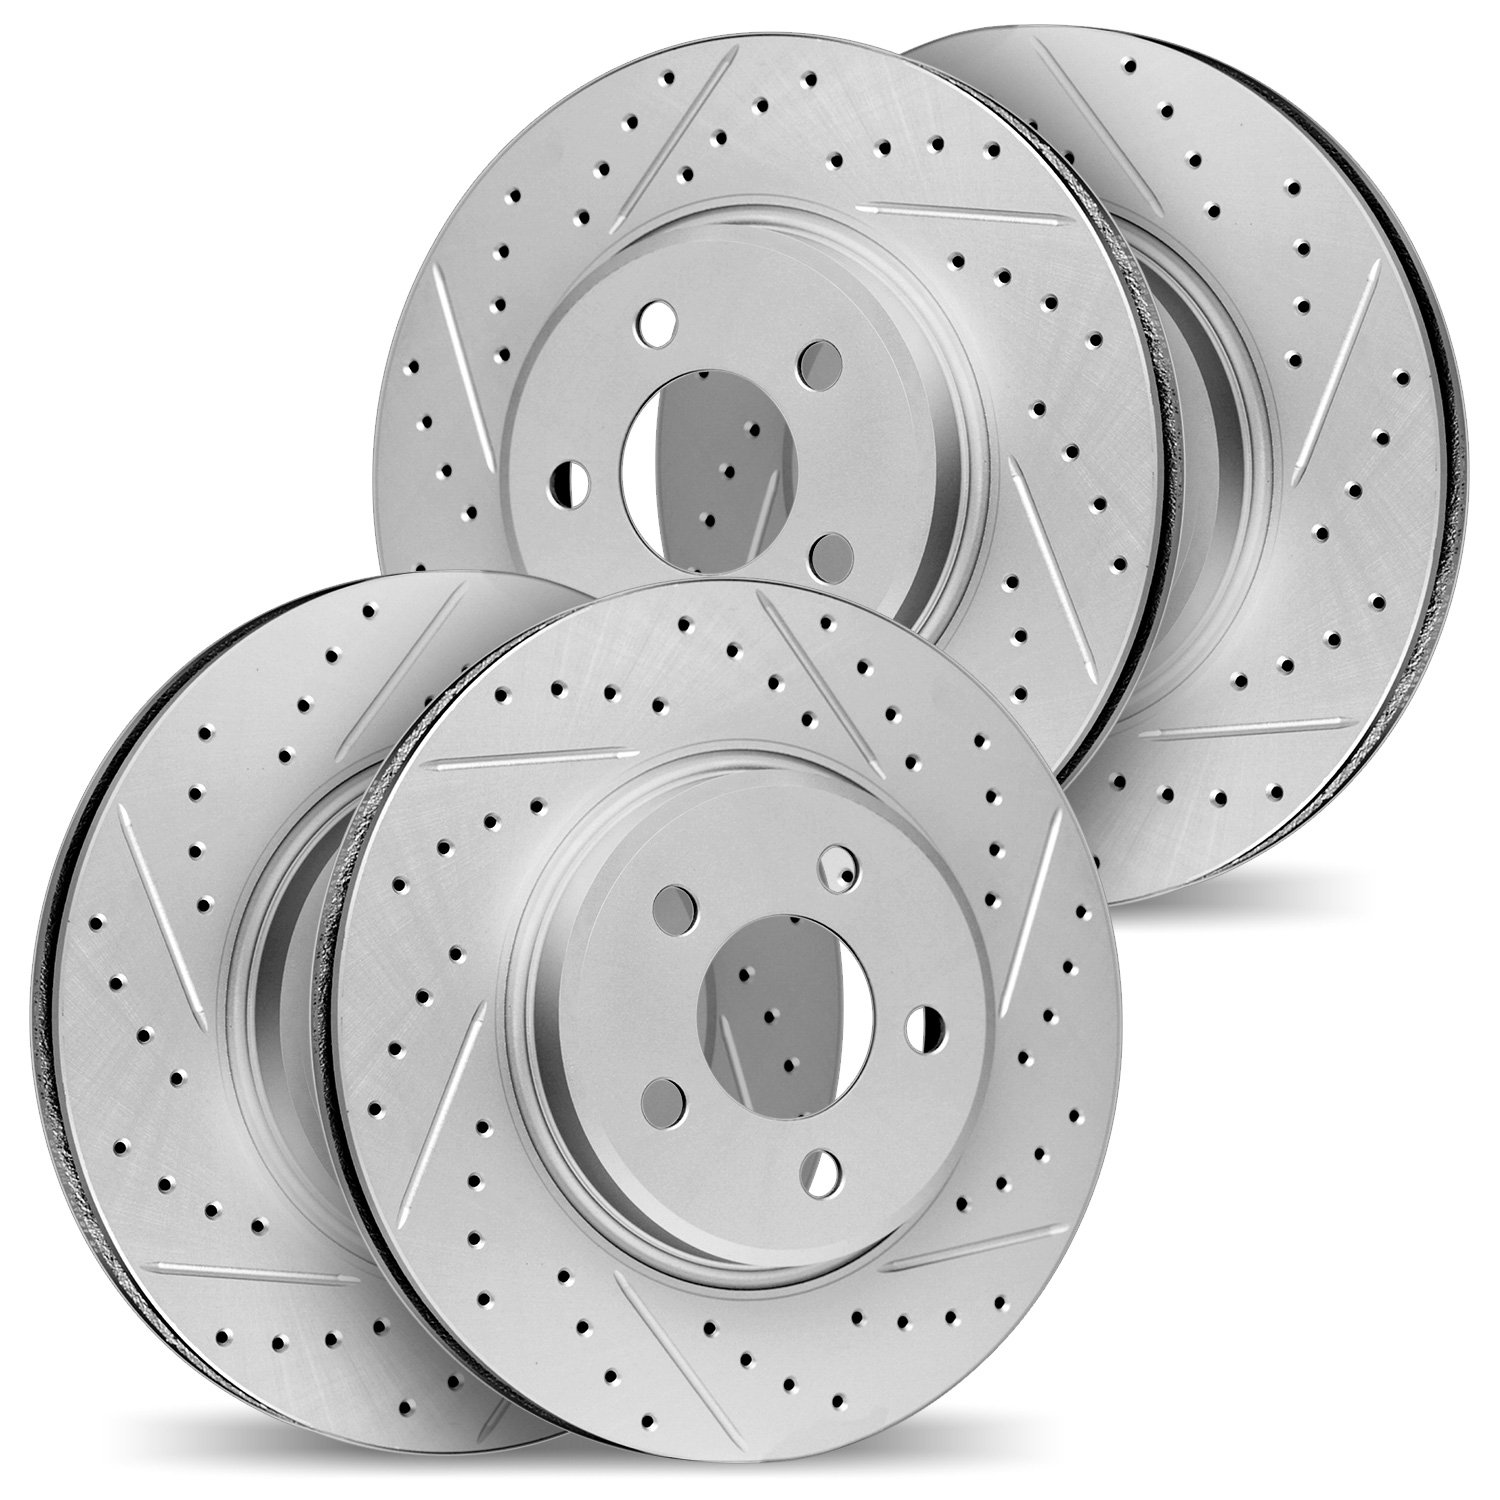 2004-67003 Geoperformance Drilled/Slotted Brake Rotors, 2005-2014 Infiniti/Nissan, Position: Front and Rear